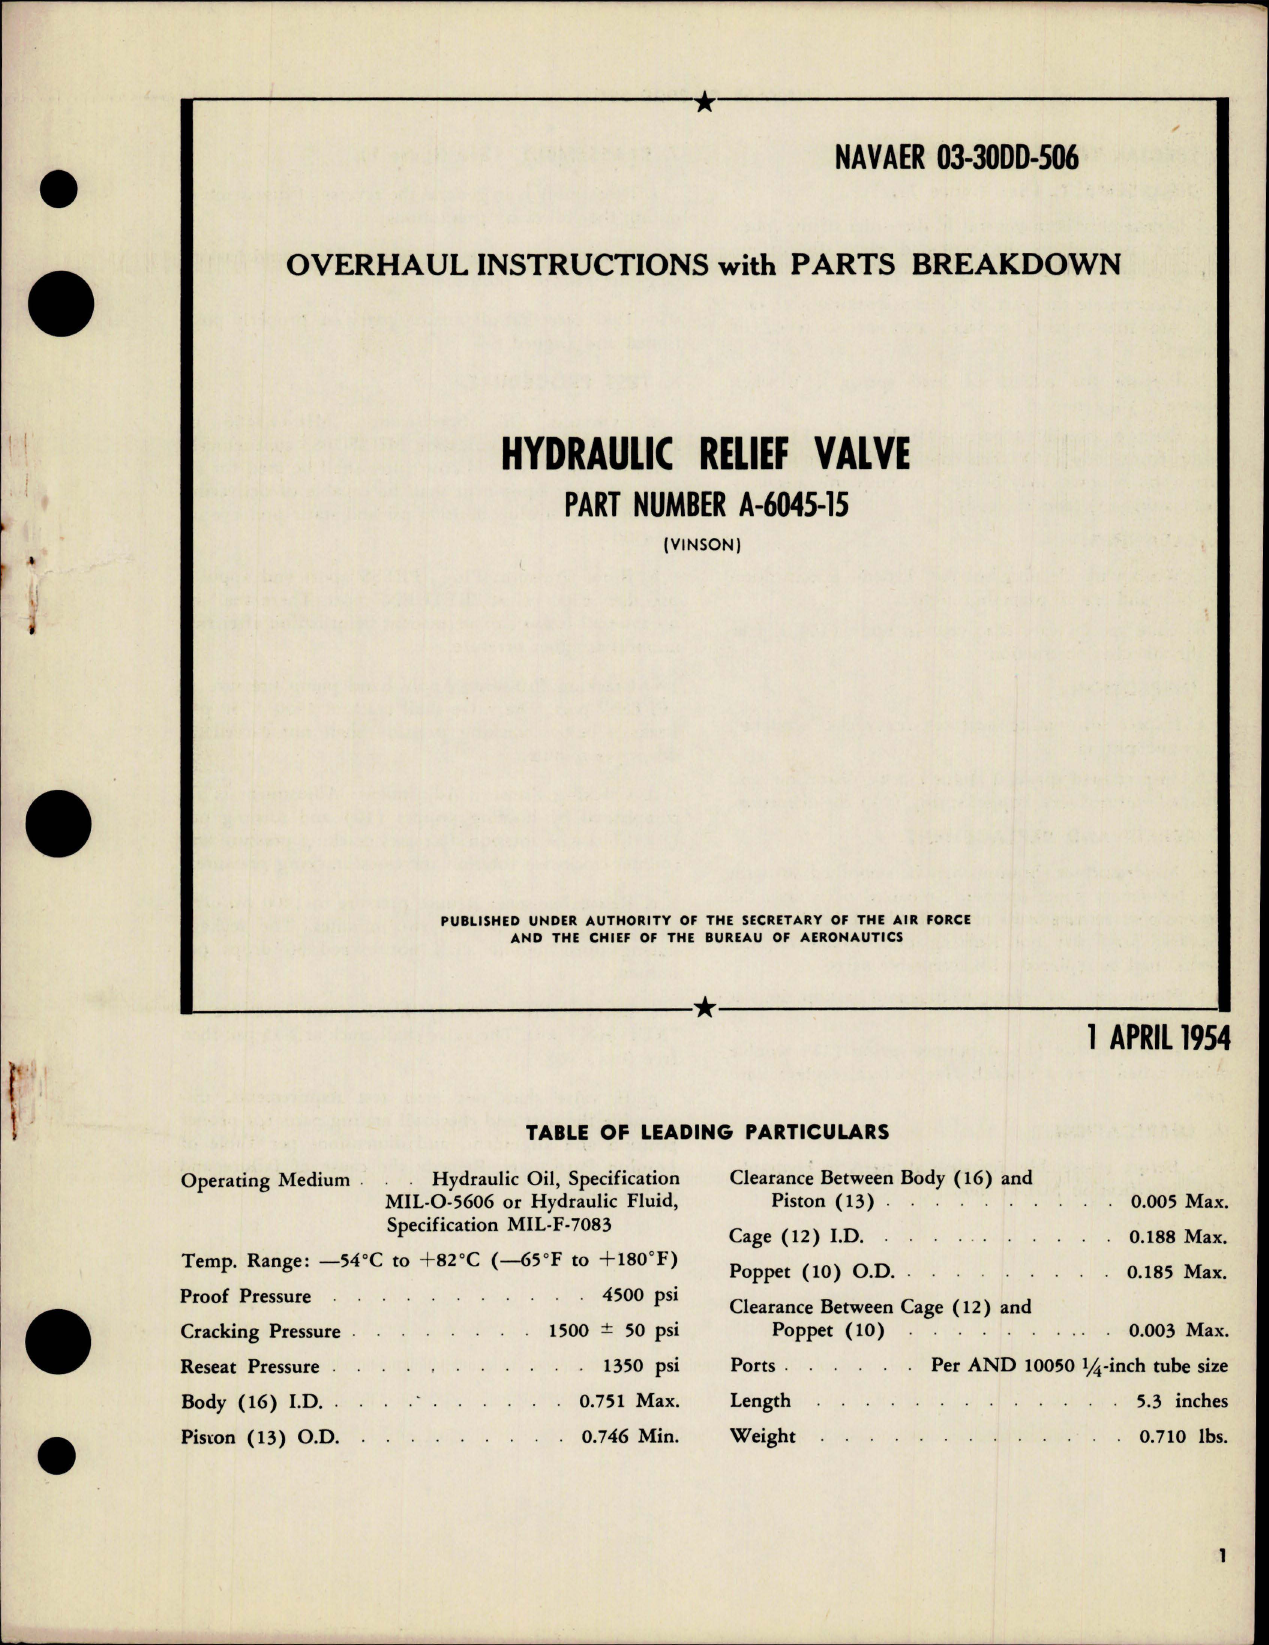 Sample page 1 from AirCorps Library document: Overhaul Instructions with Parts Breakdown for Hydraulic Relief Valve - Part A-6045-15 